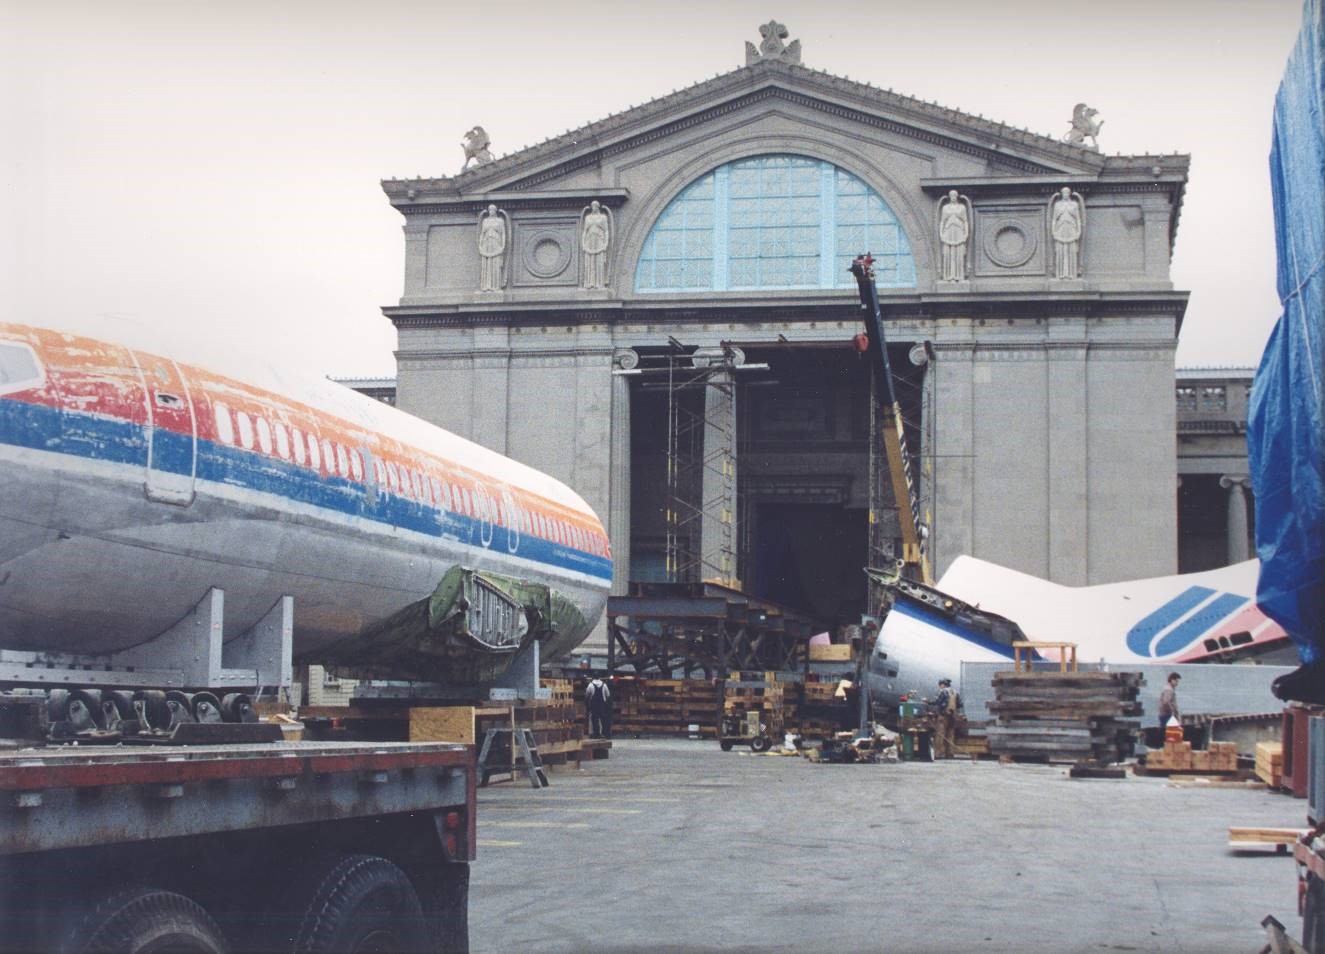 Large exhibit project requiring specialized structural engineering services for custom moving cradle equipment and detailed path load analysis and shoring of existing structure. Heavy loads include jet aircraft, and steam locomotive exhibits.